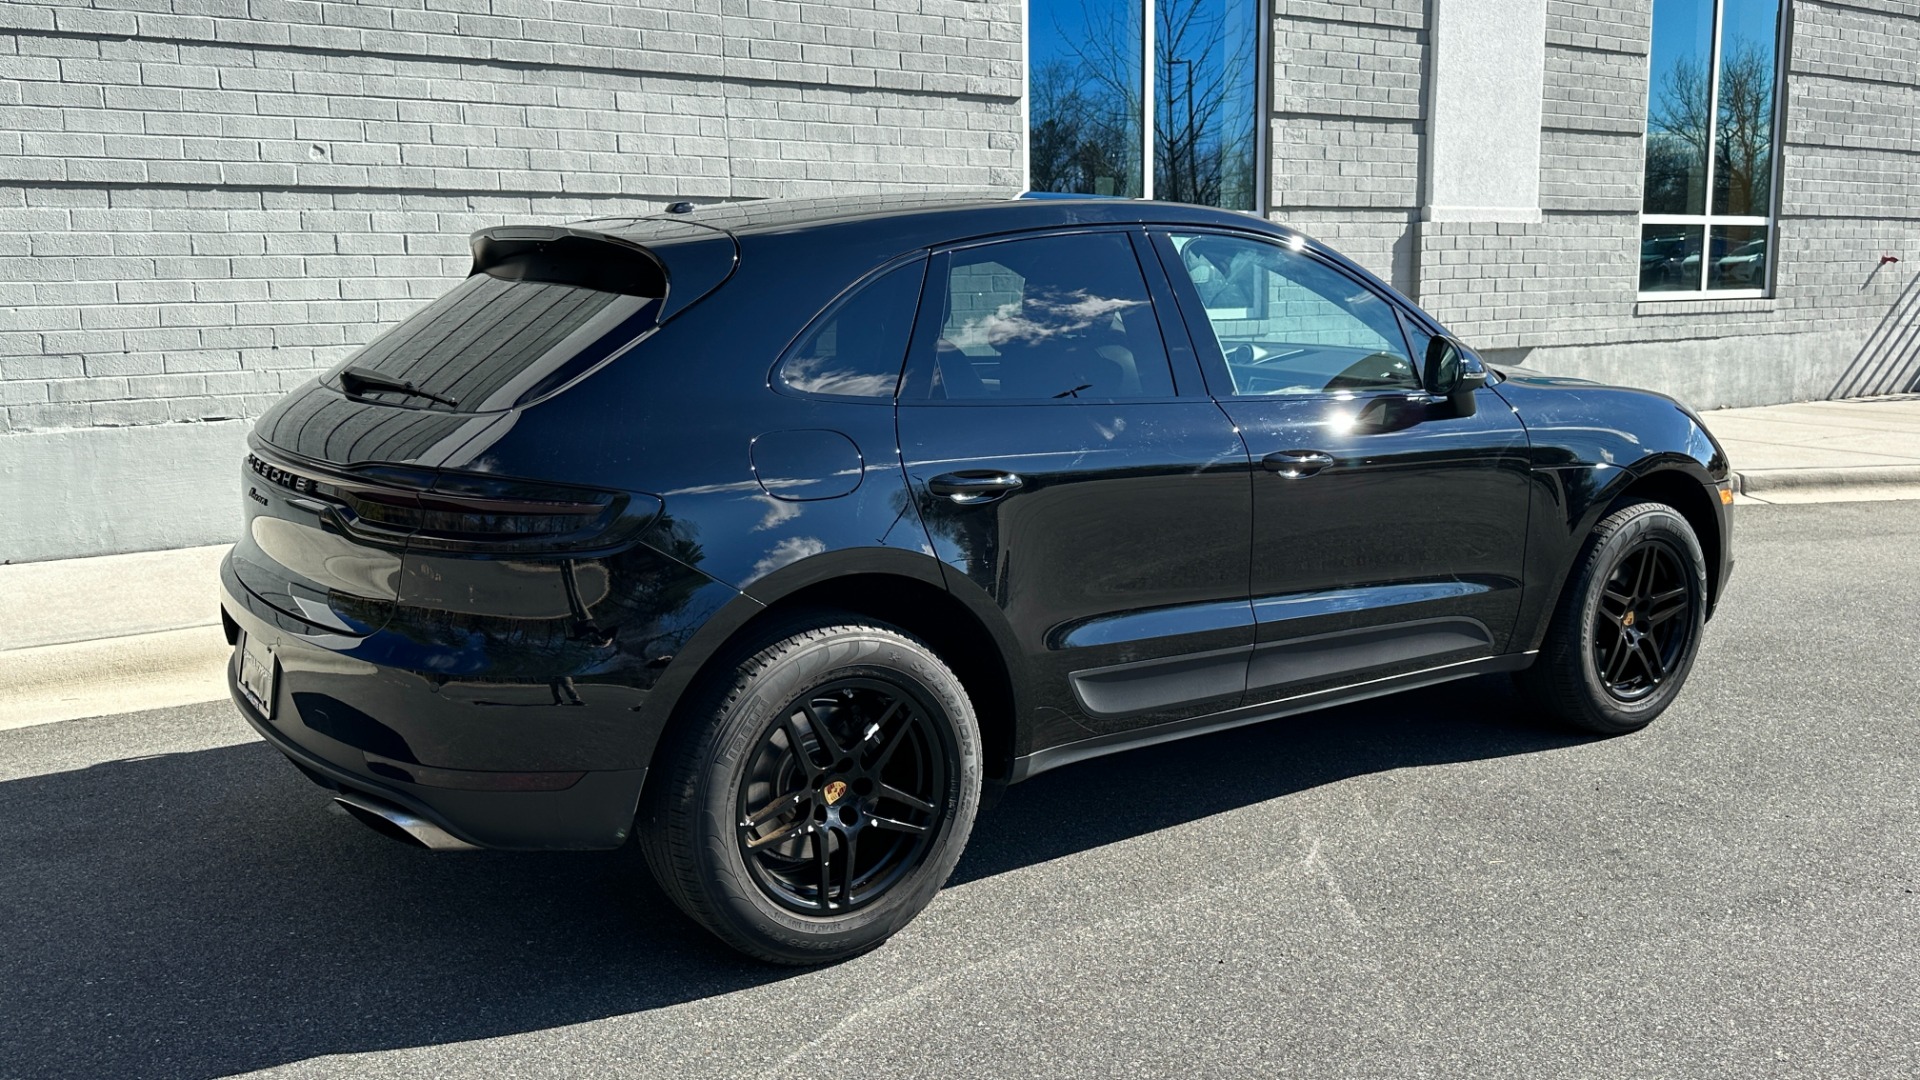 Used 2020 Porsche Macan PREMIUM PACKAGE / GLOSS BLACK TRIM / LANE ASSIST / 18IN MACAN S WHEELS for sale $44,995 at Formula Imports in Charlotte NC 28227 4